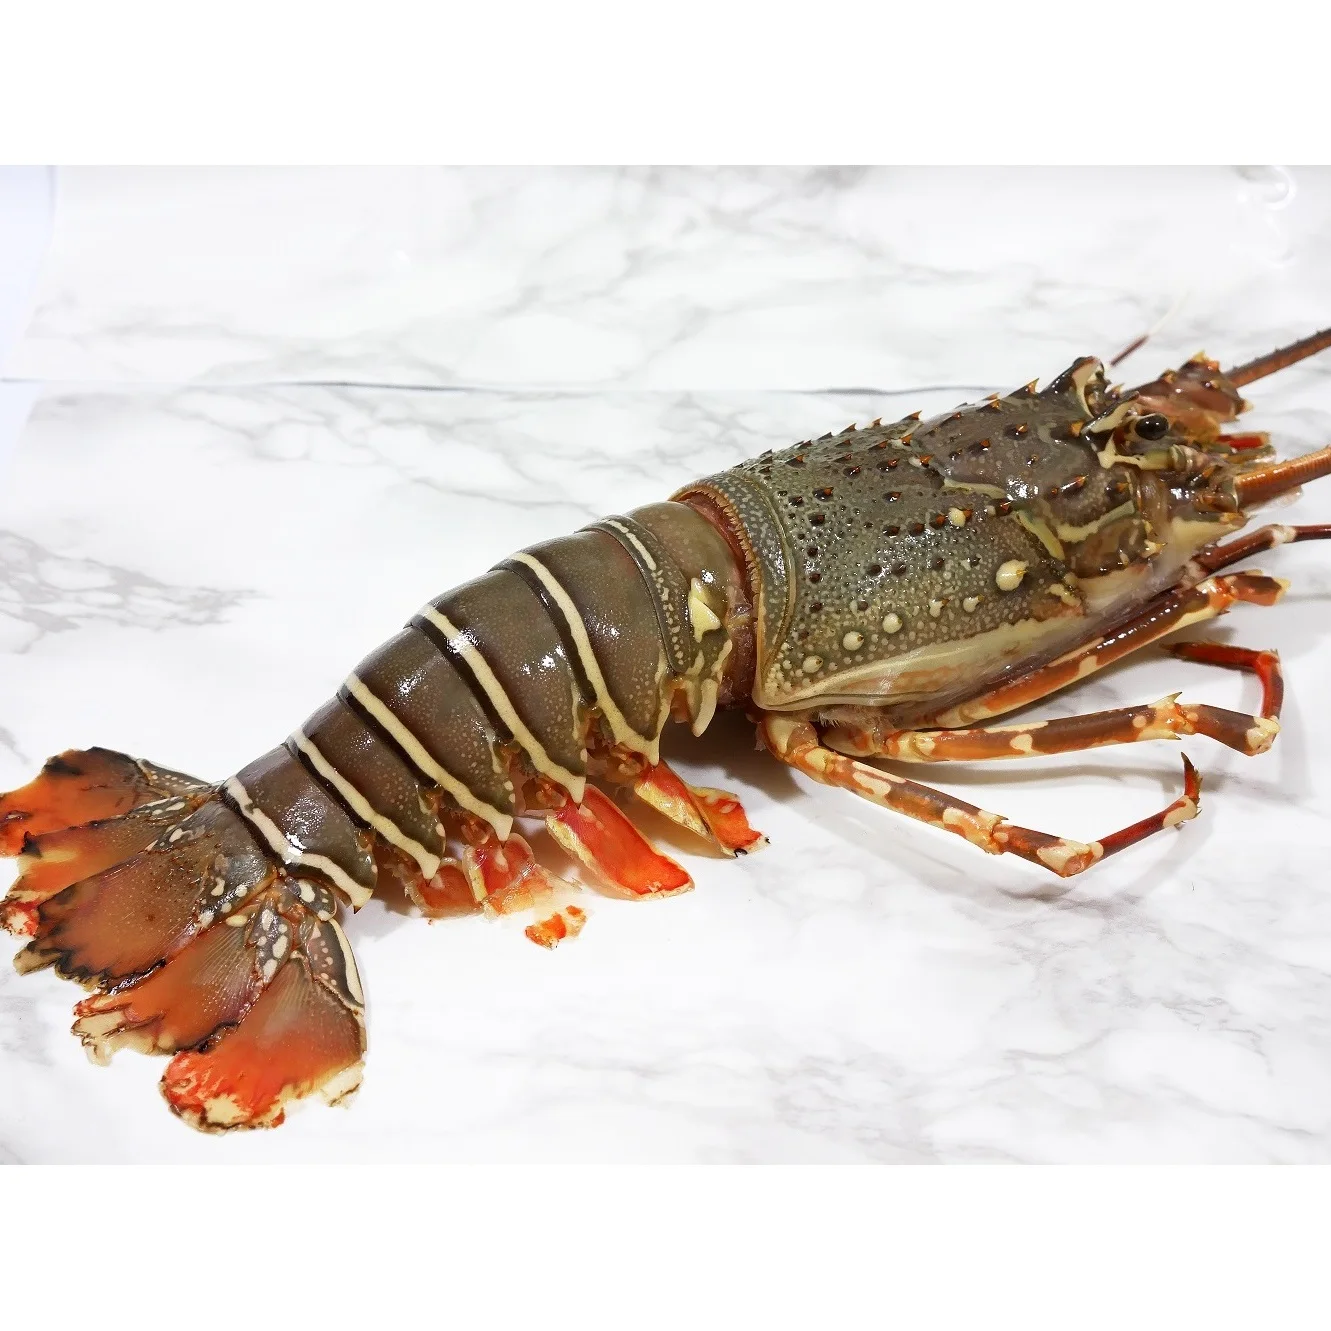 Frozen Lobsters Crawfish Lobsters,Natural Lobster Fresh Seafood Bfq ...